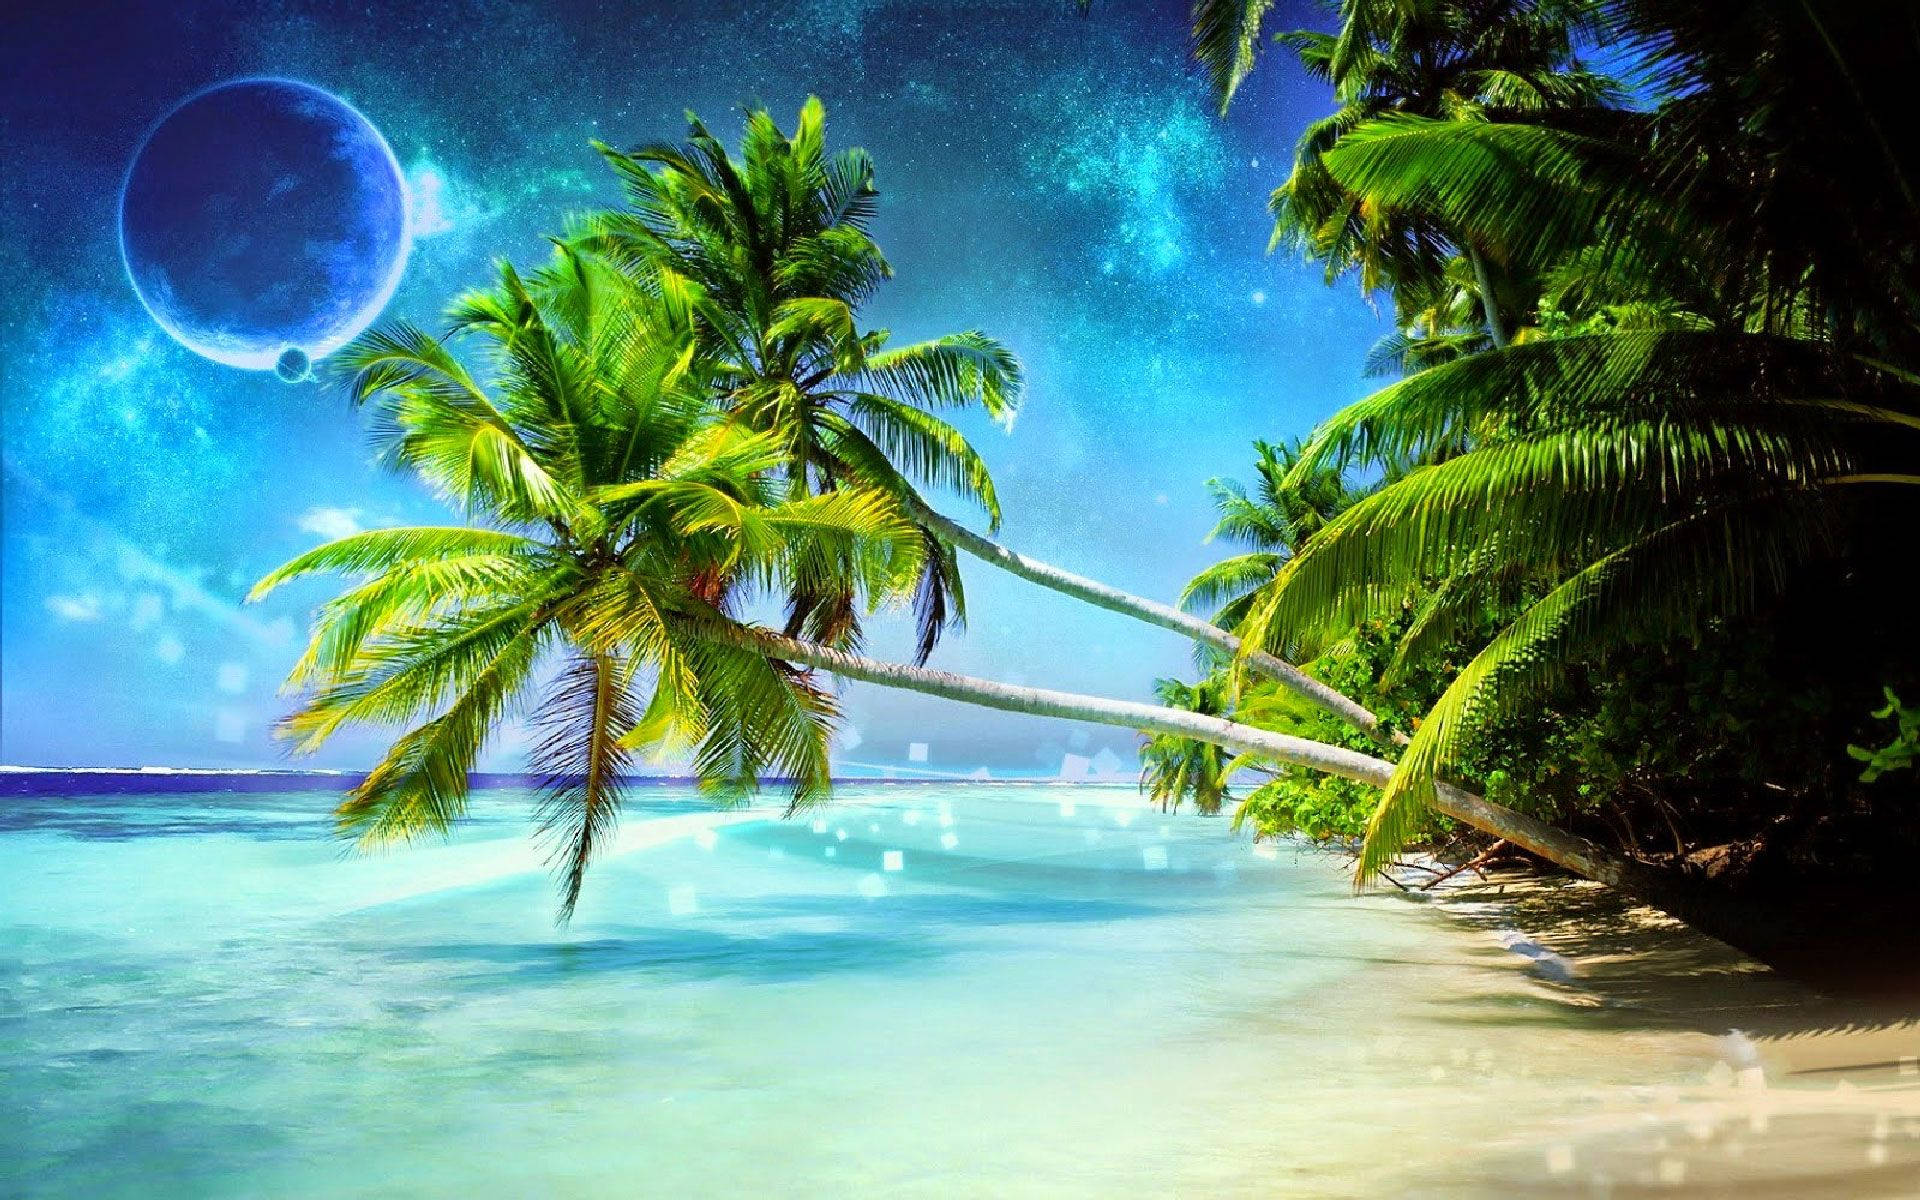 Relaxing On A Sunny Beach Surrounded By 3d Coconut Trees